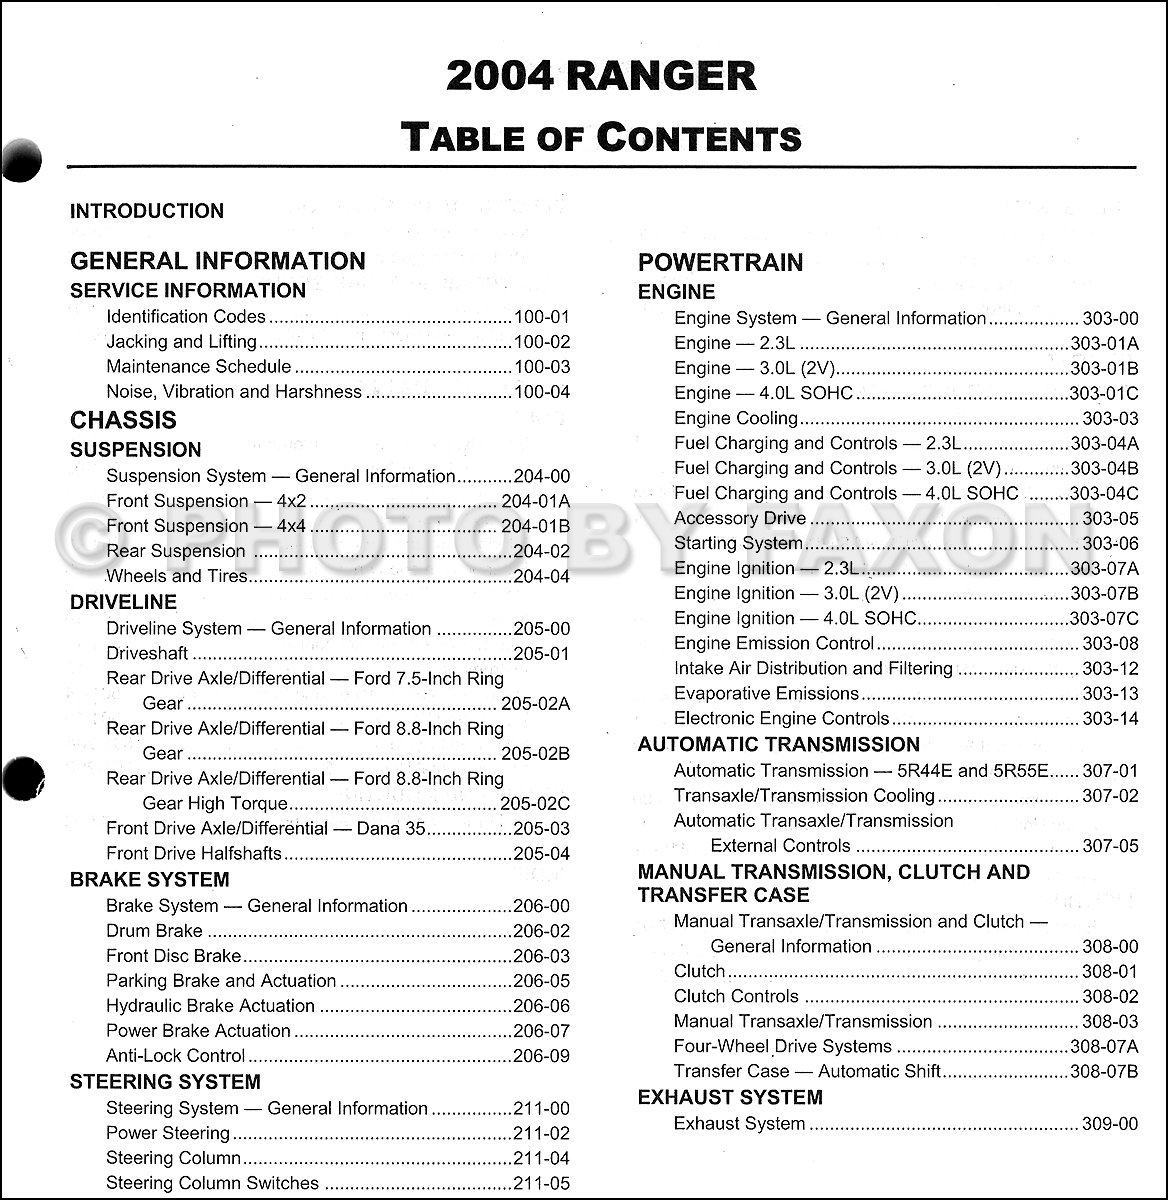 2004 Ford ranger xlt owners manual #8